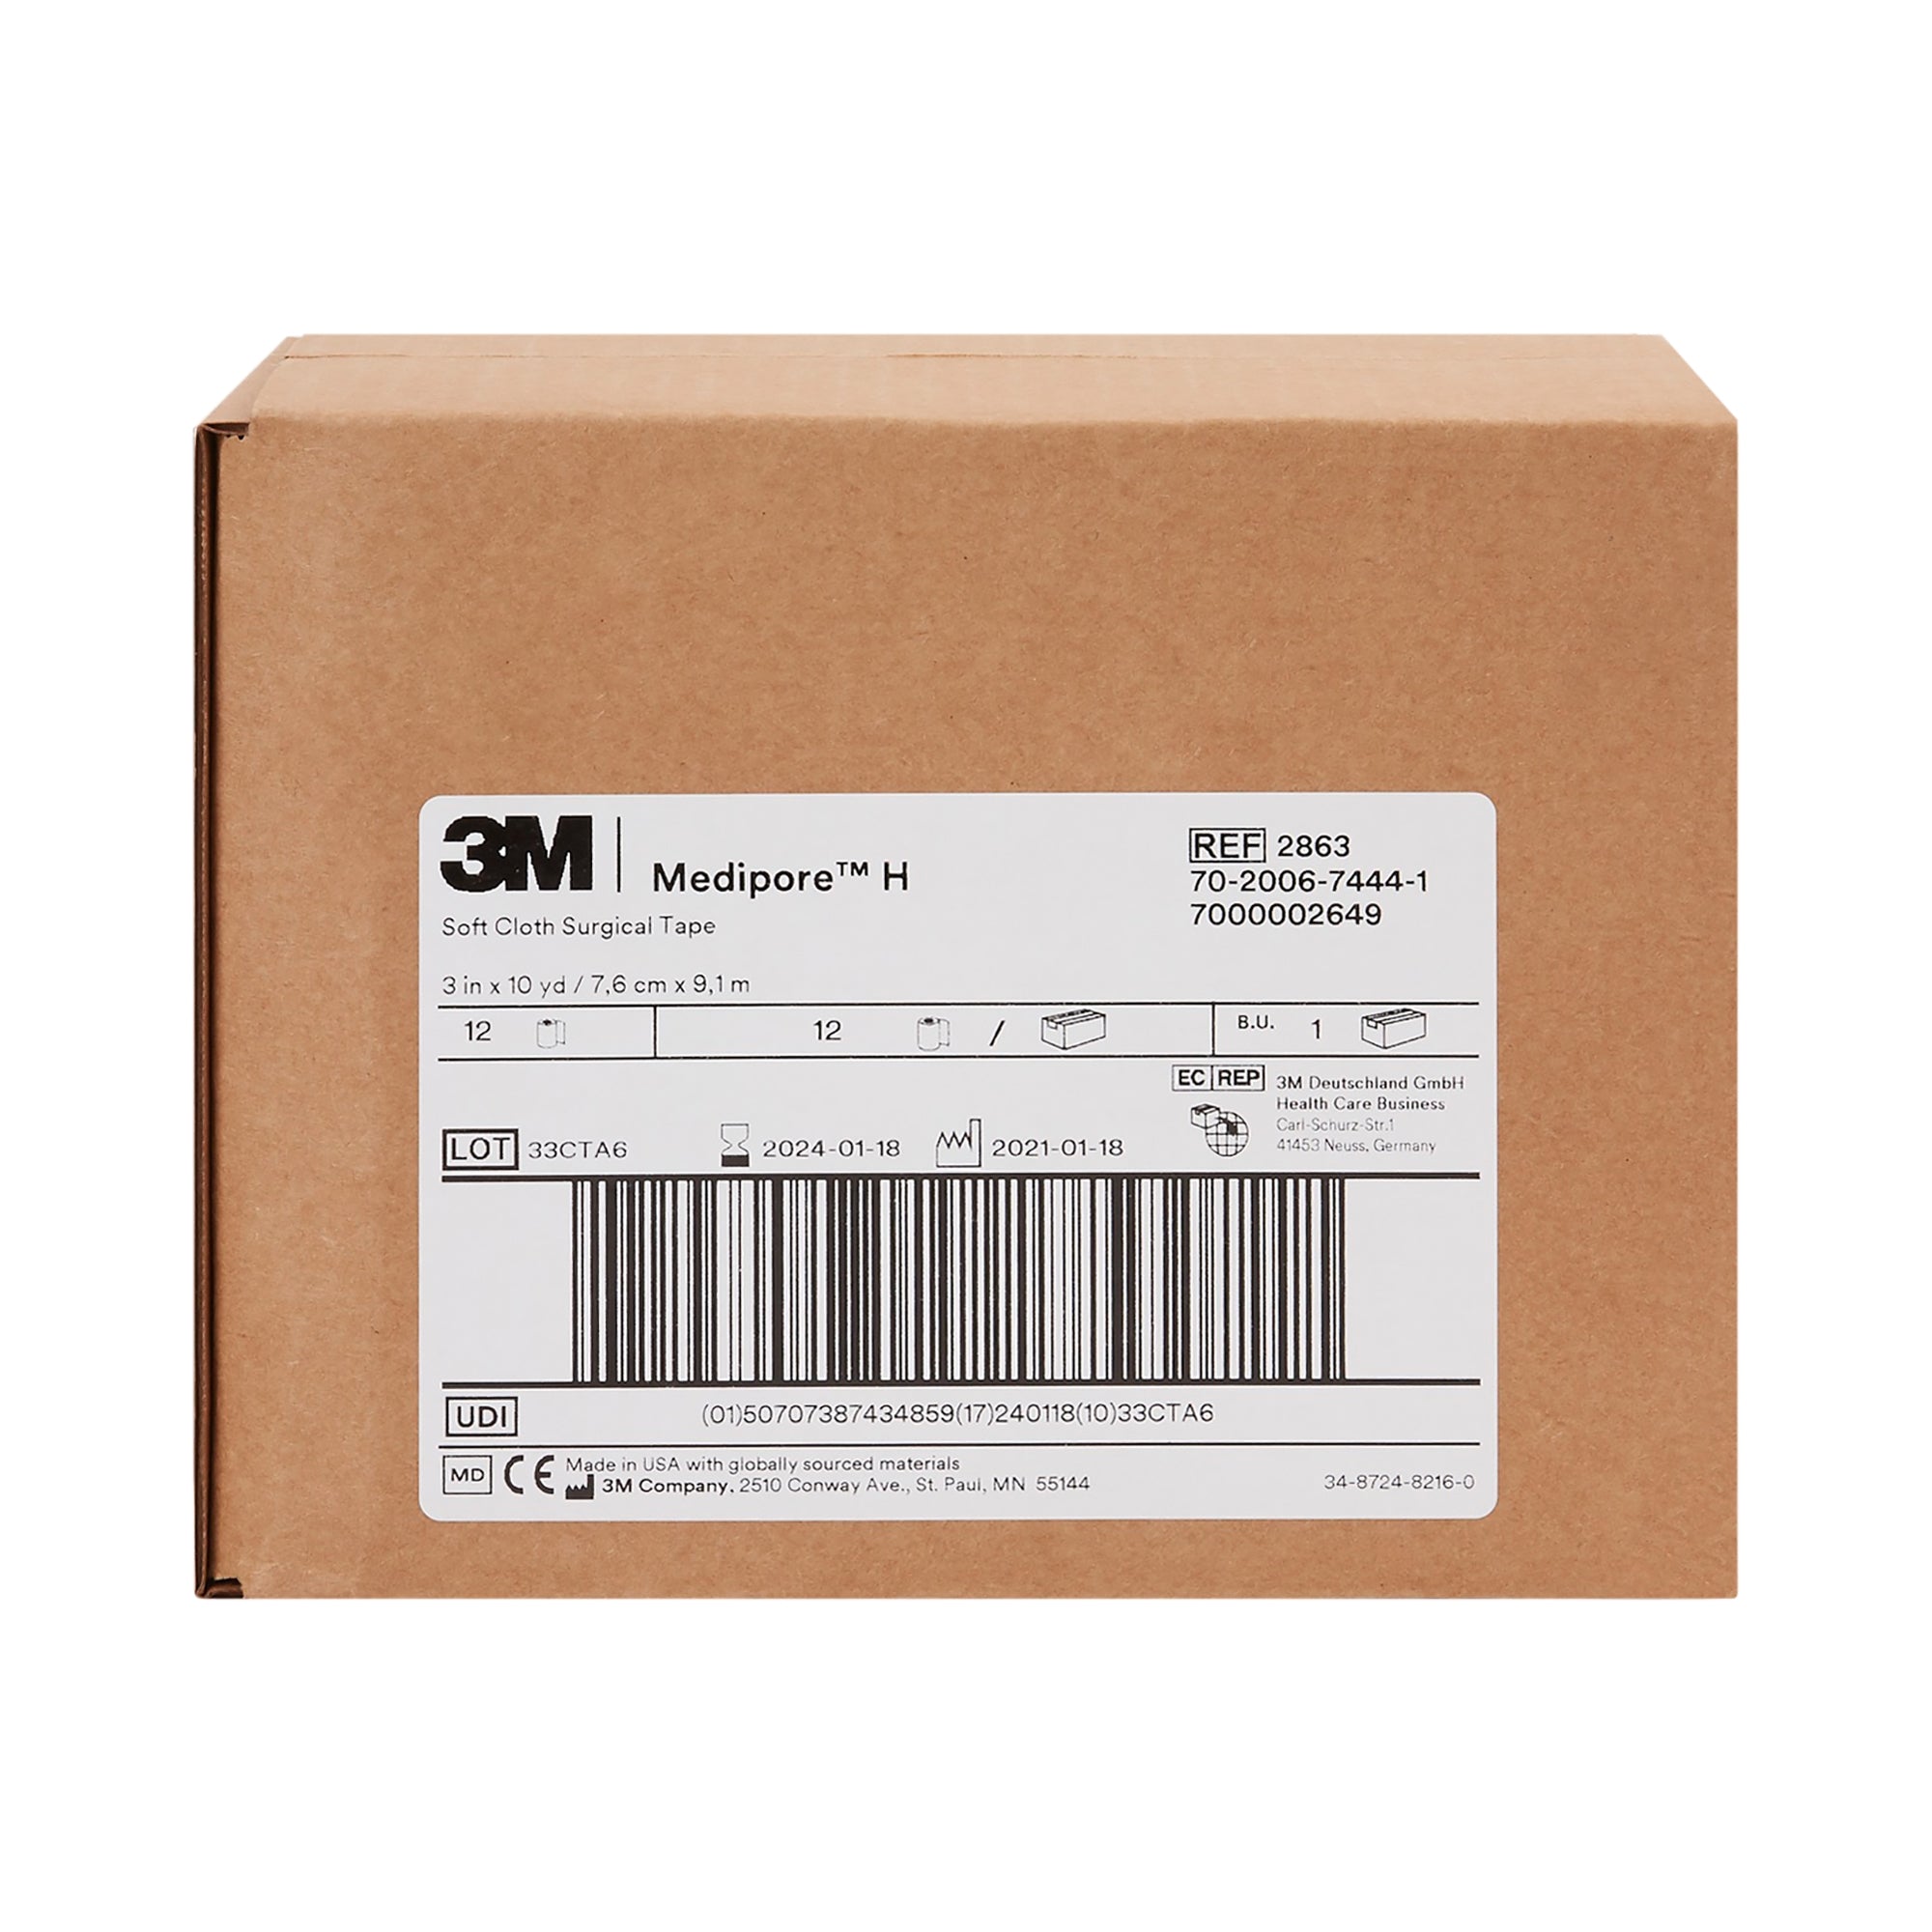 3M™ Medipore™ H Perforated Medical Tape - Soft Cloth - 3